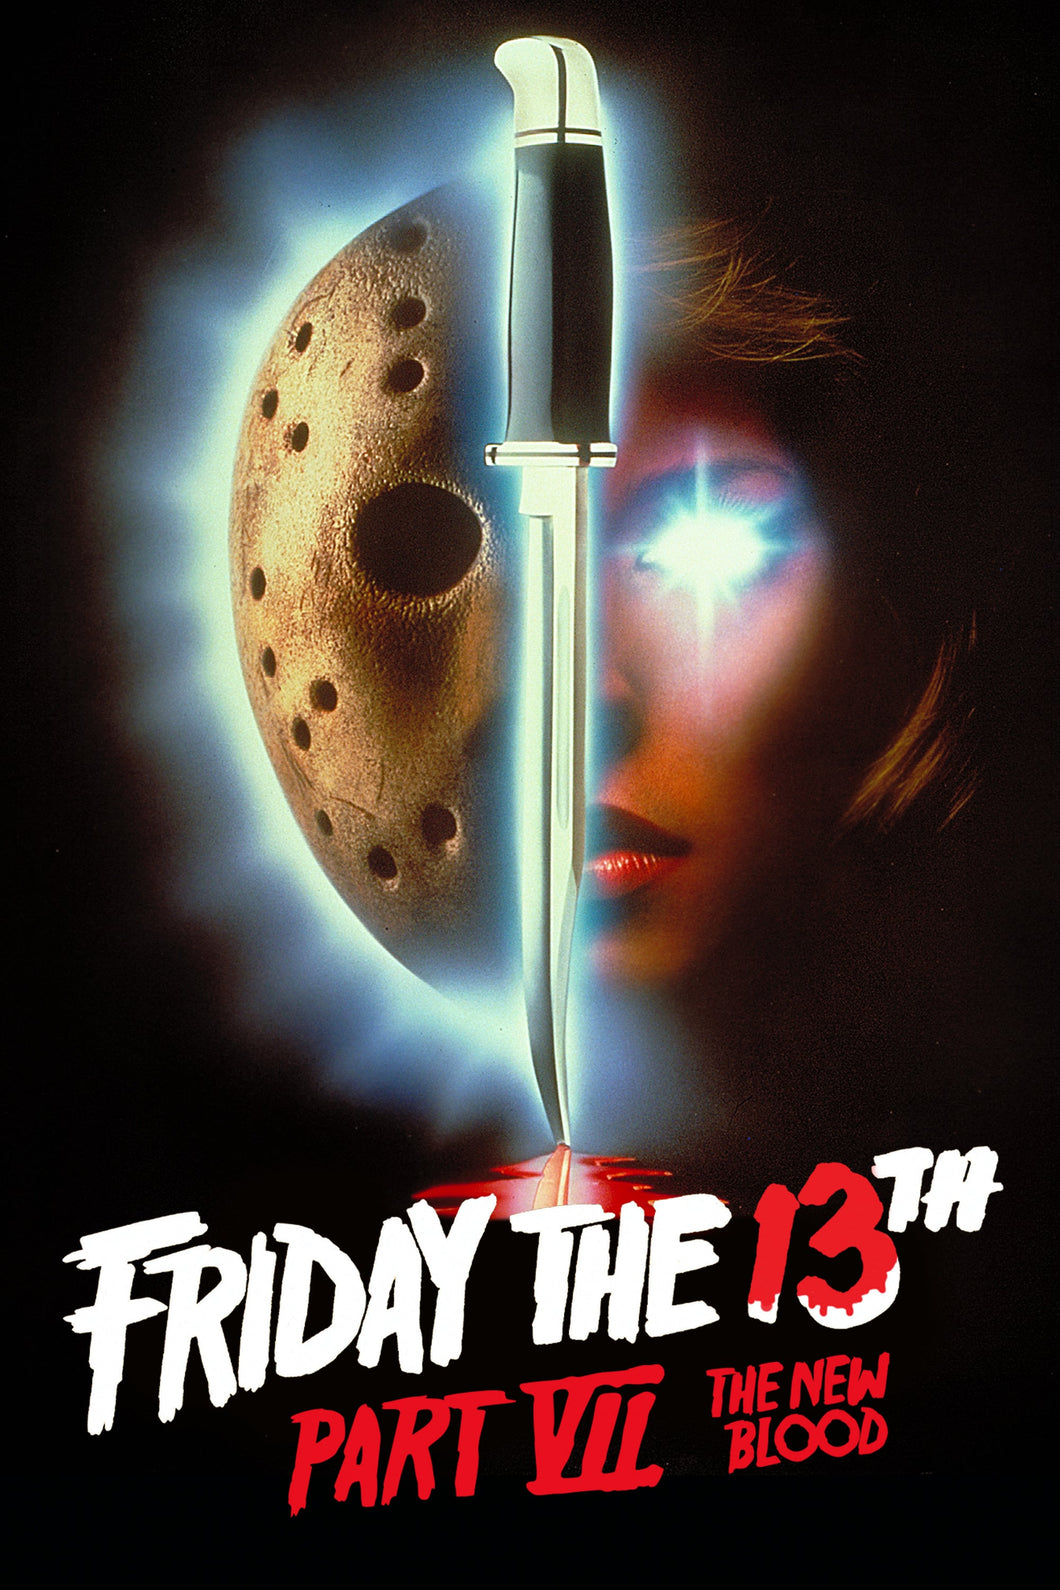 Friday the 13th Part VII v2 Movie Poster High Quality Glossy Paper A1 A2 A3 A4 A3 Framed or Unframed!!!